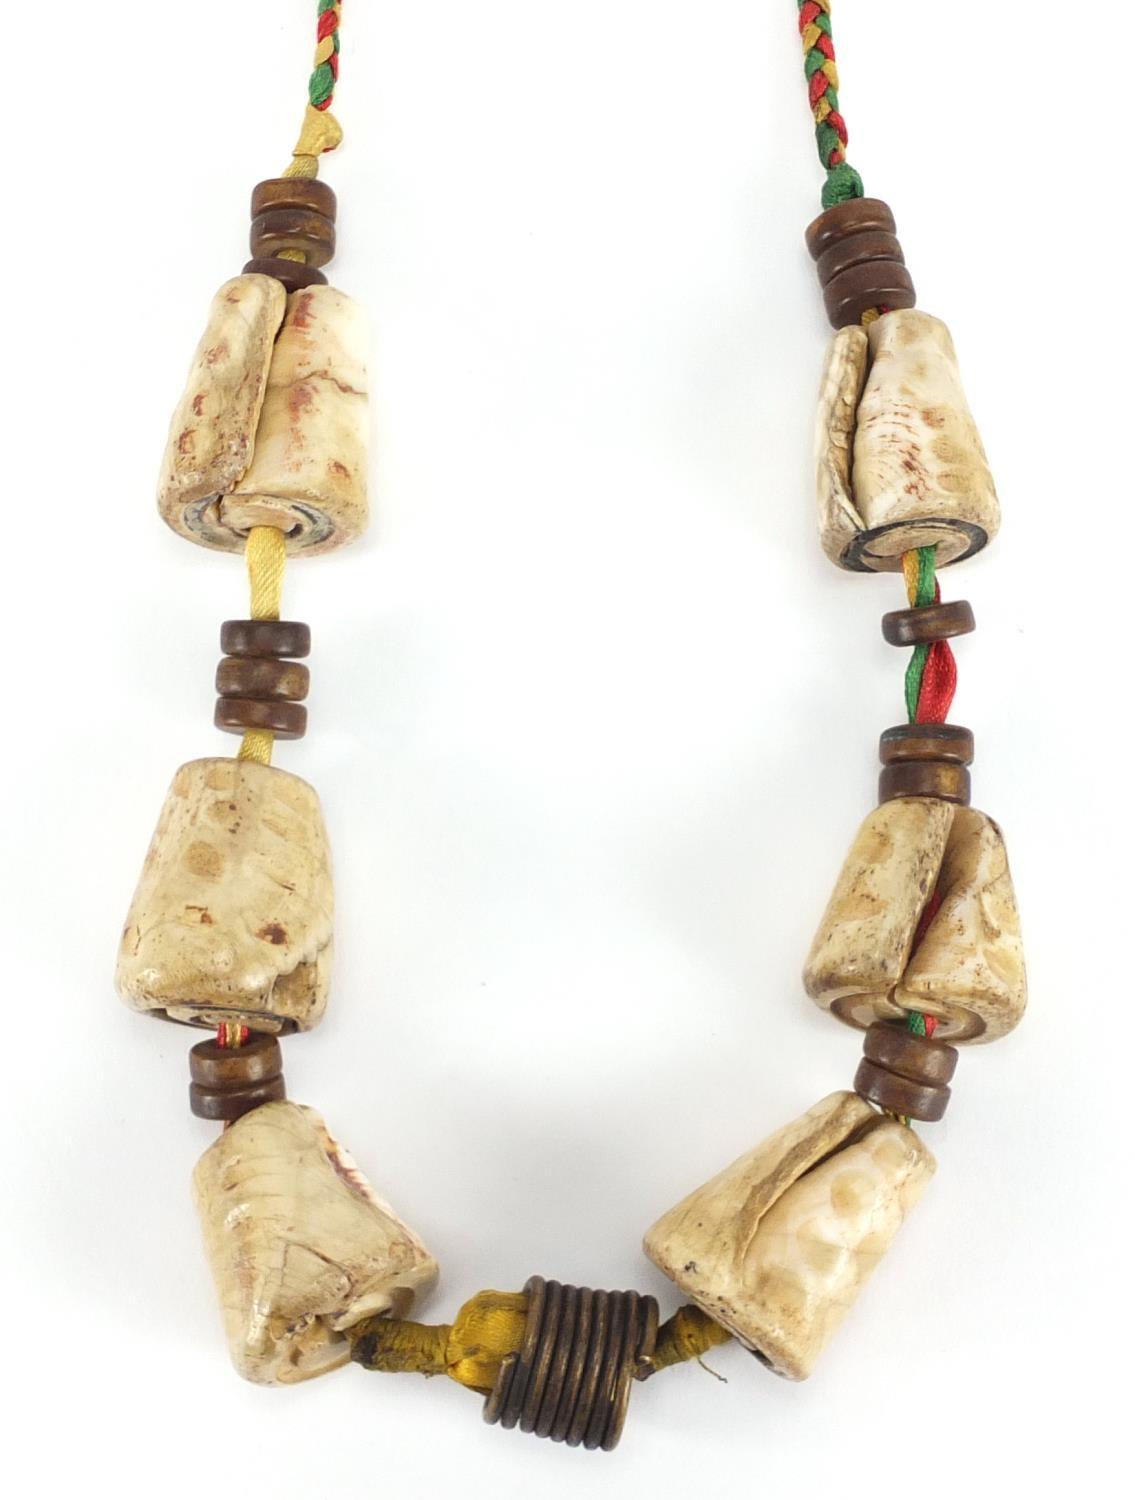 Tribal interest shell necklace : For Further Condition Reports Please visit our website - We